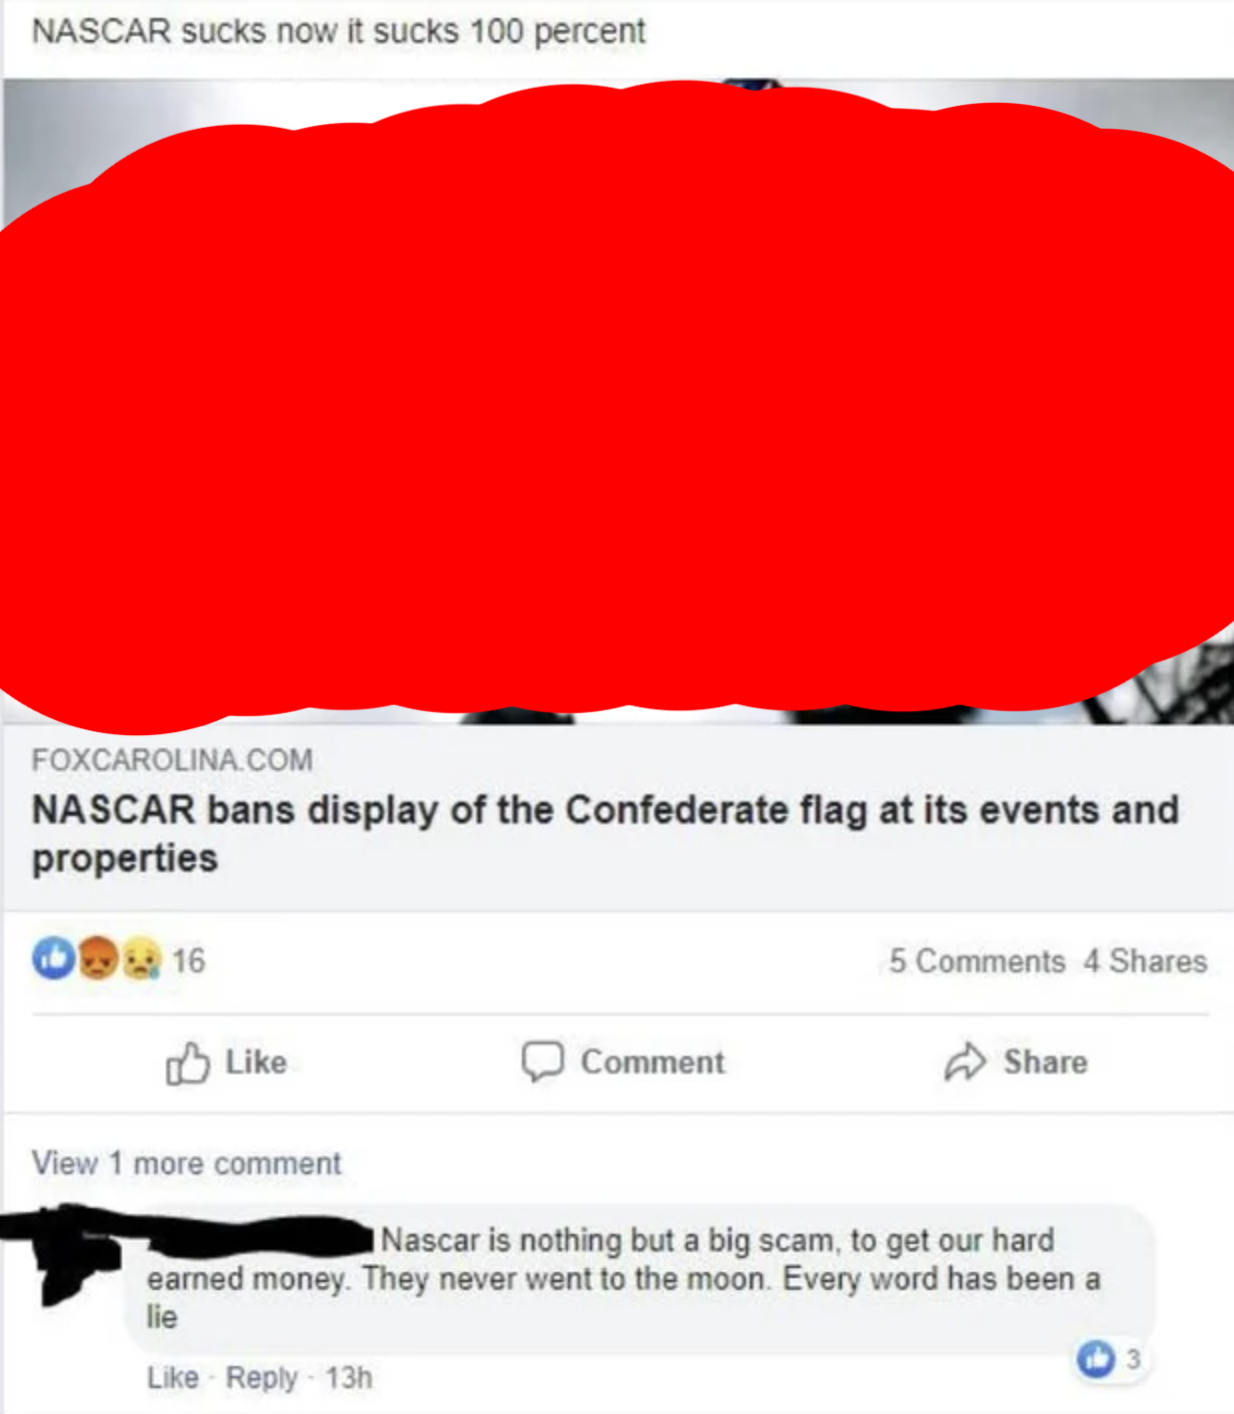 Facebook reply to an article about NASCAR banning Confederate flags saying that NASCAR is a scam because &quot;they never went to the moon&quot;